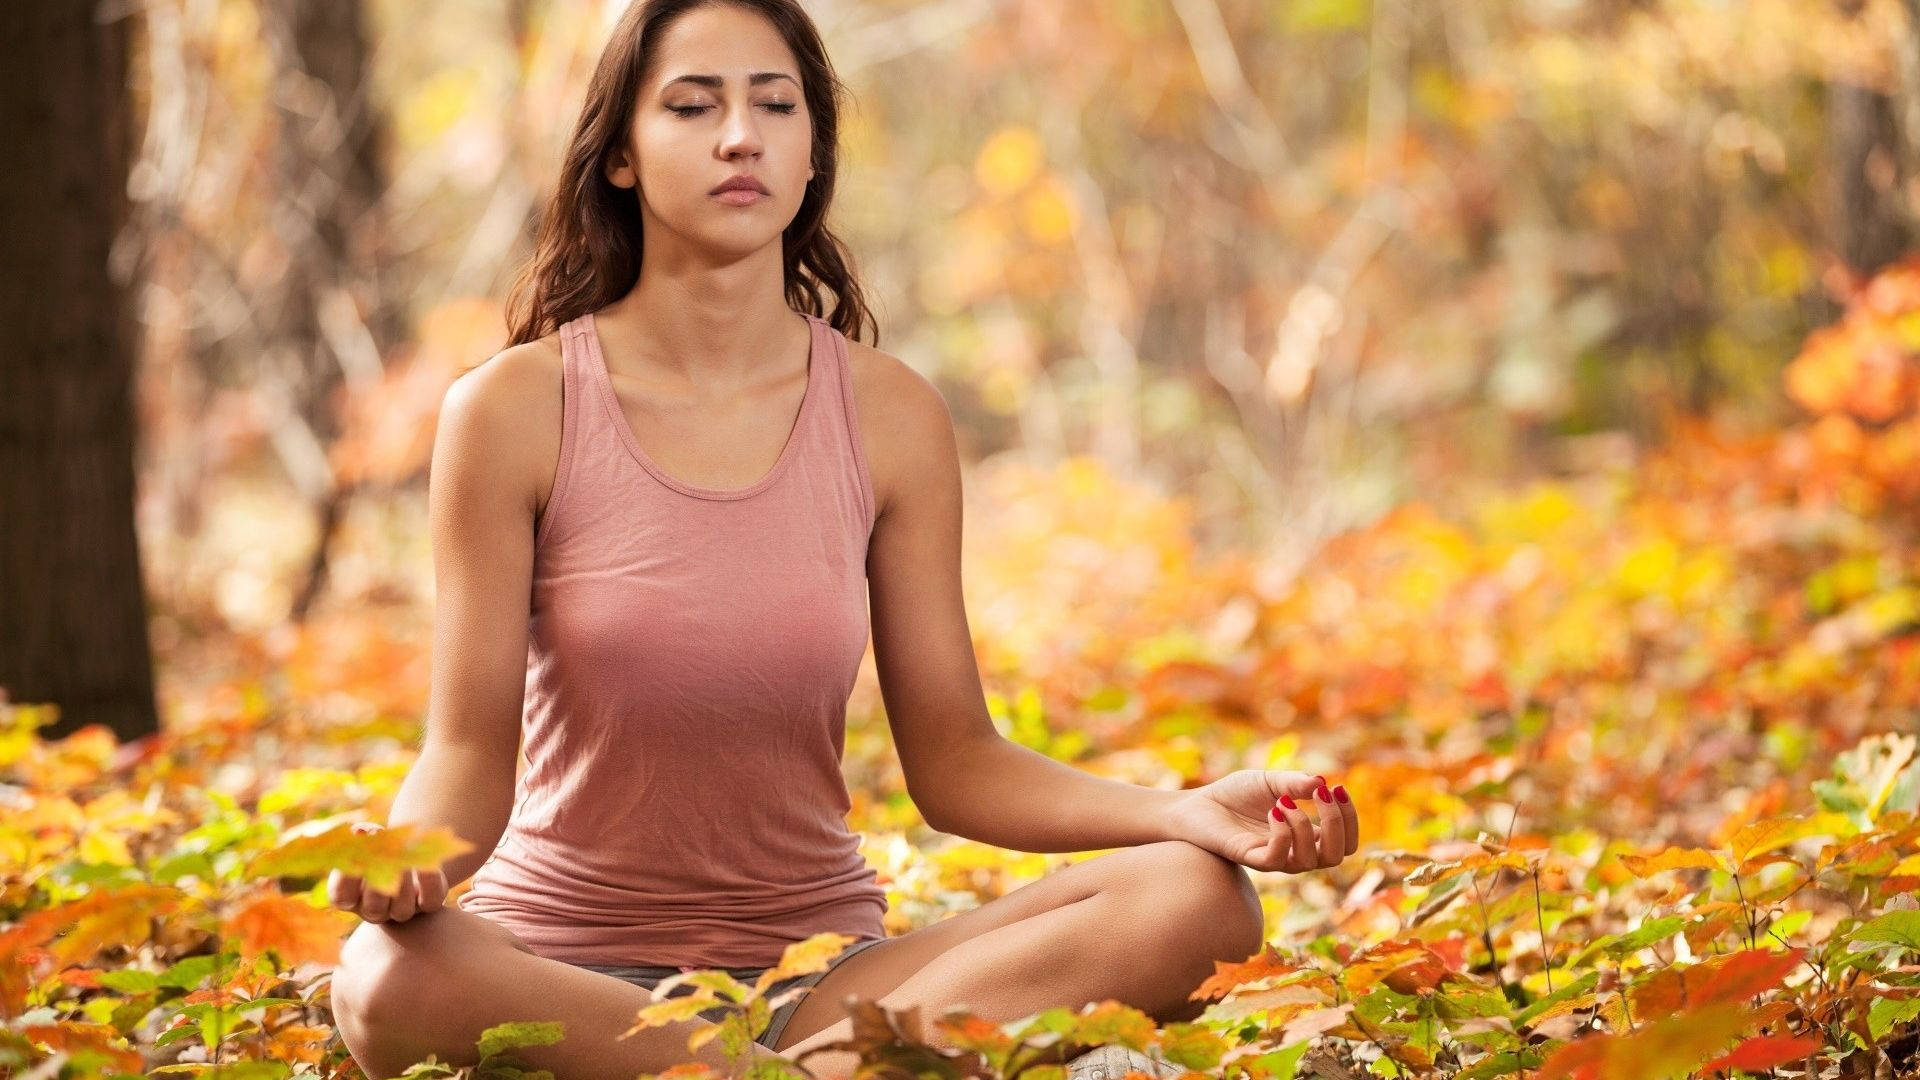 Woman Yoga In Autumn Background